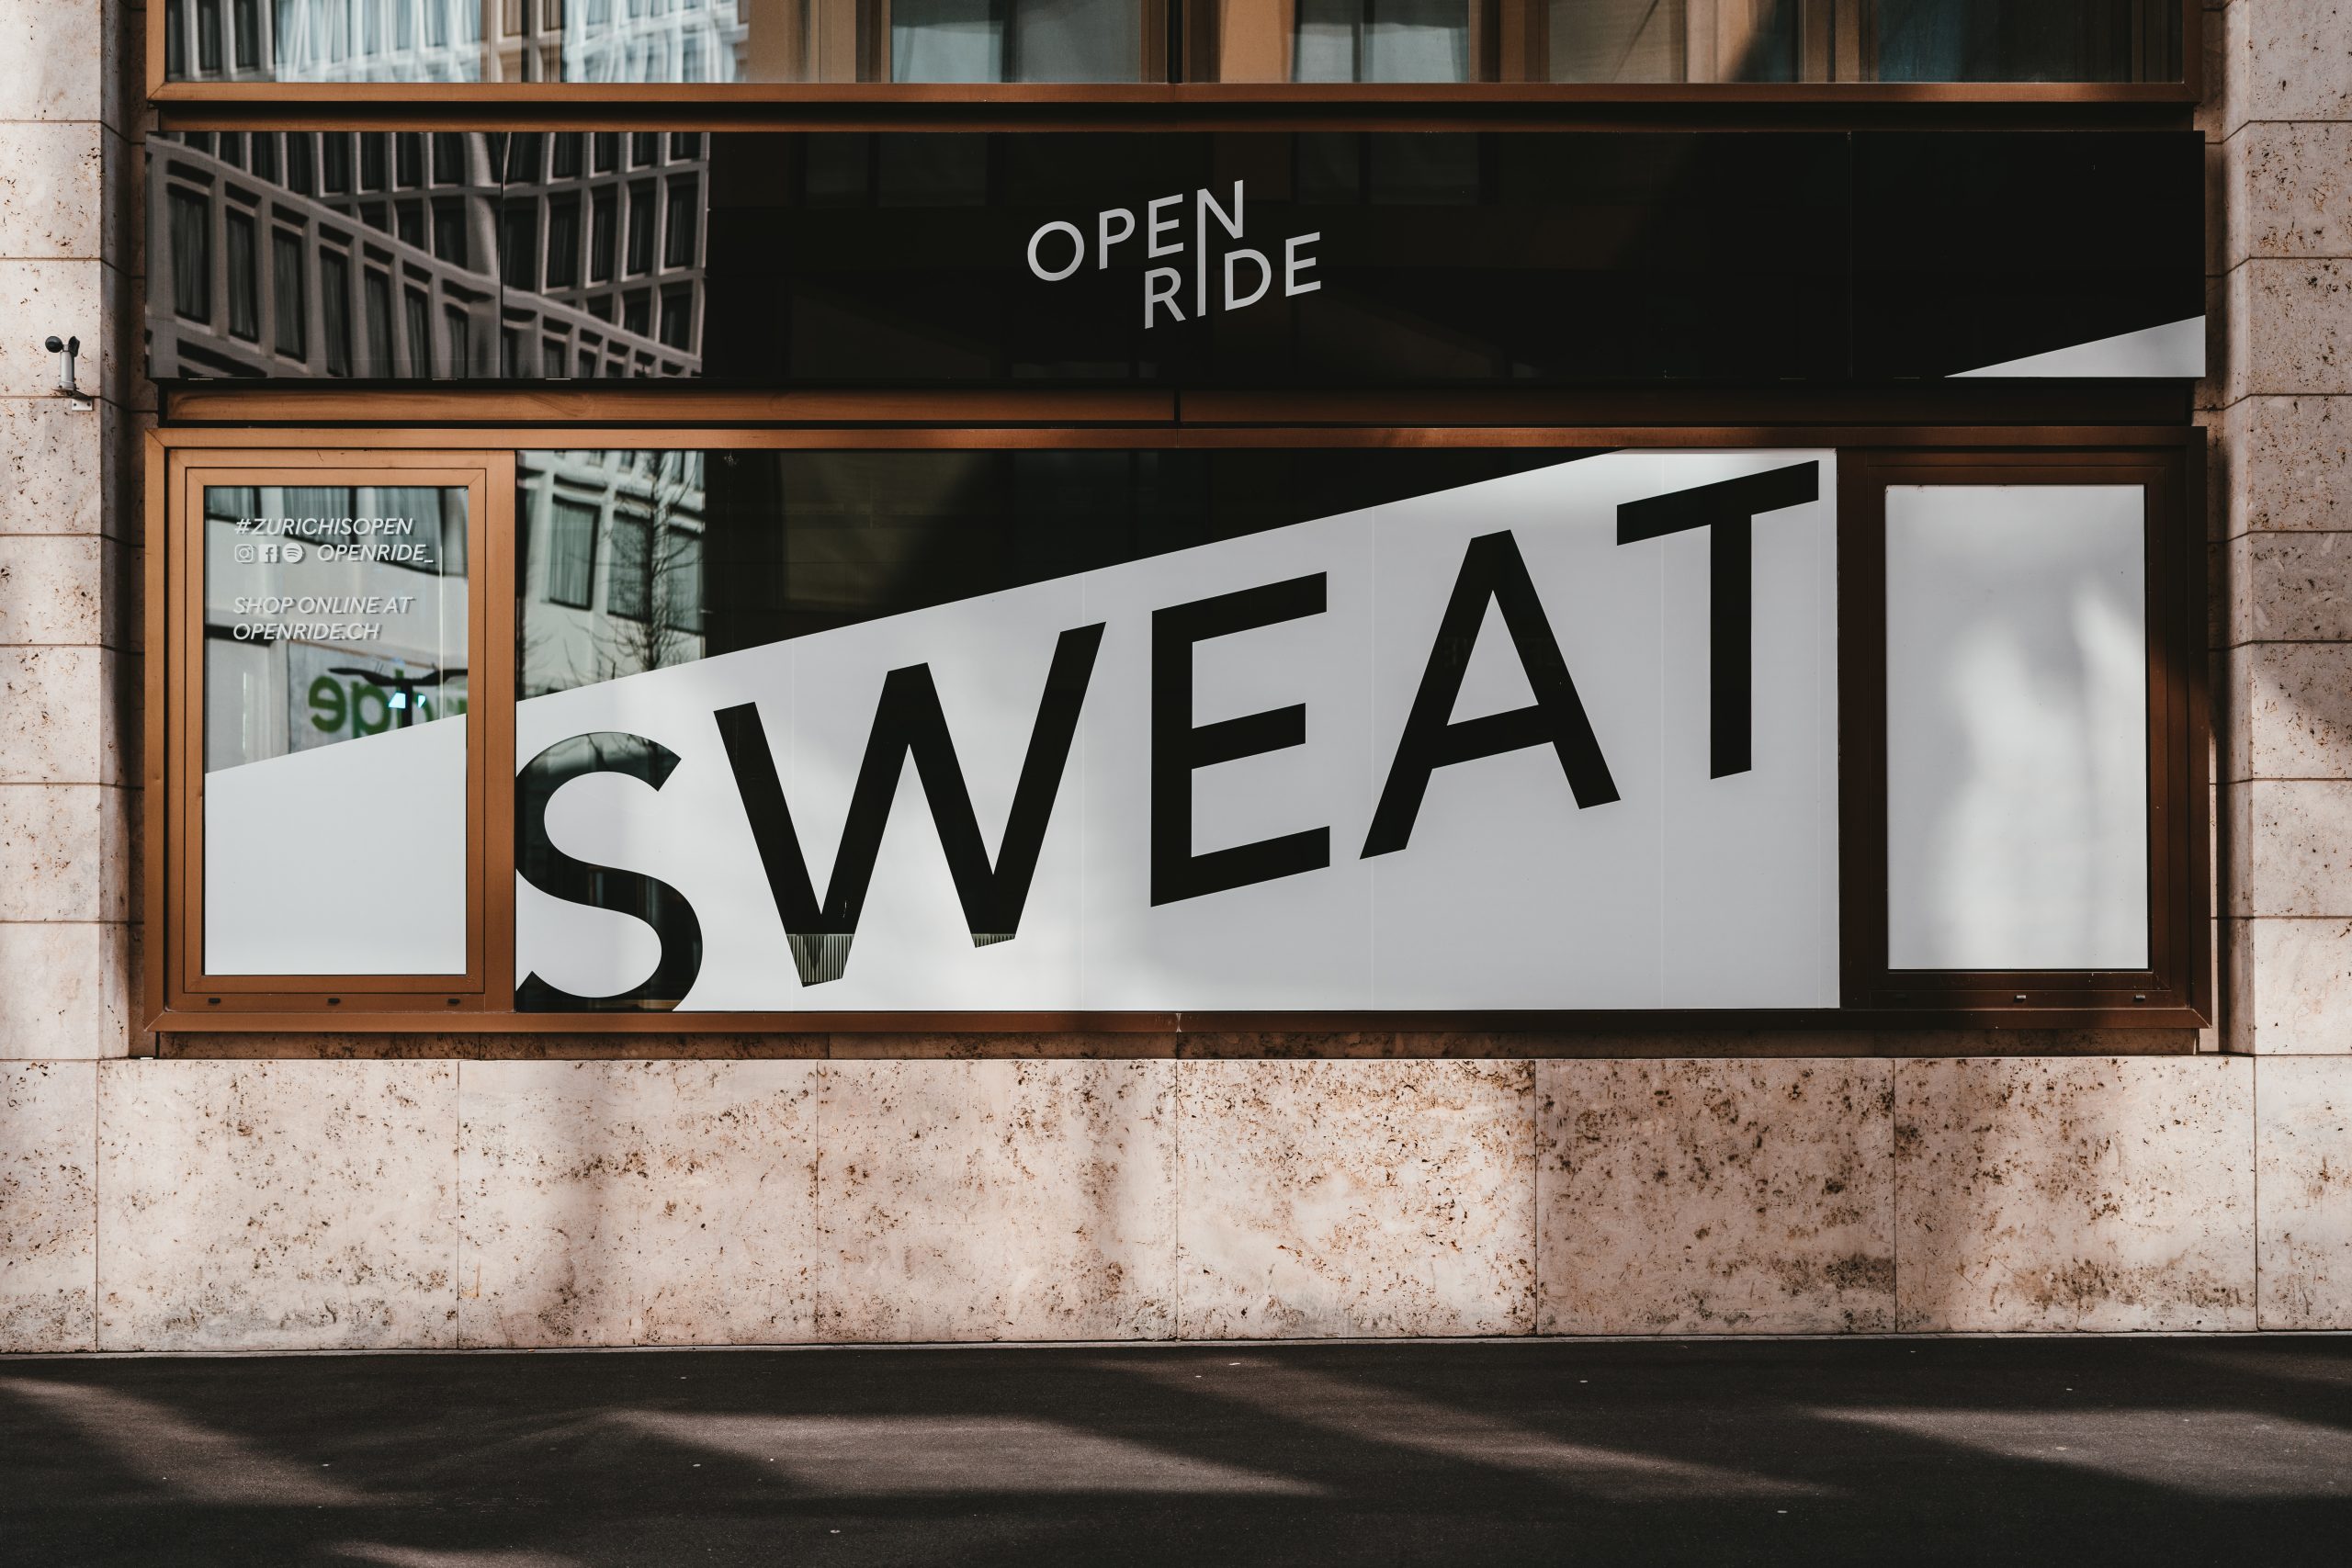 Don’t sweat it (or do)